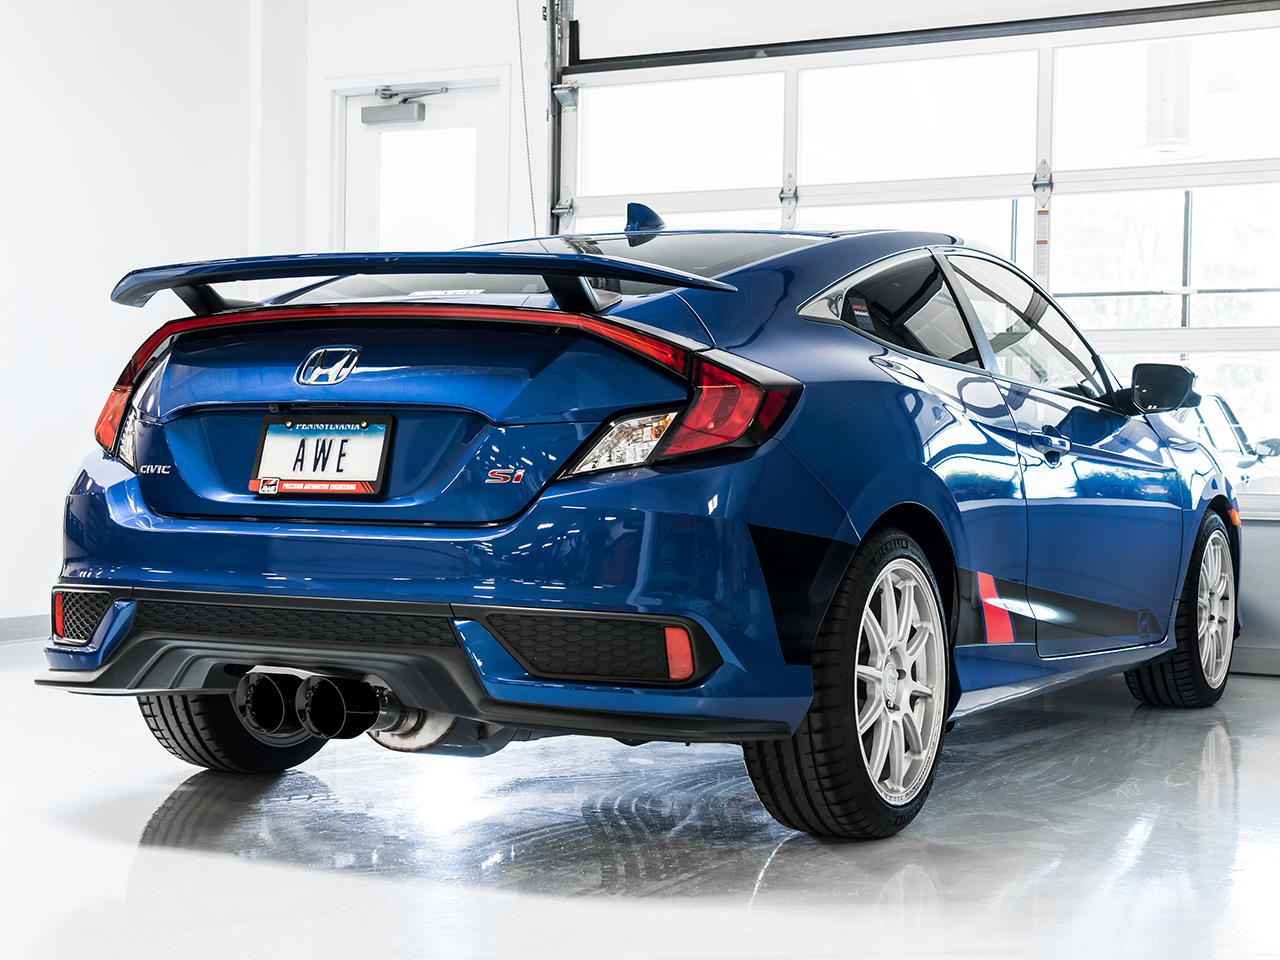 AWE Touring Edition Exhaust for 10th Gen Civic